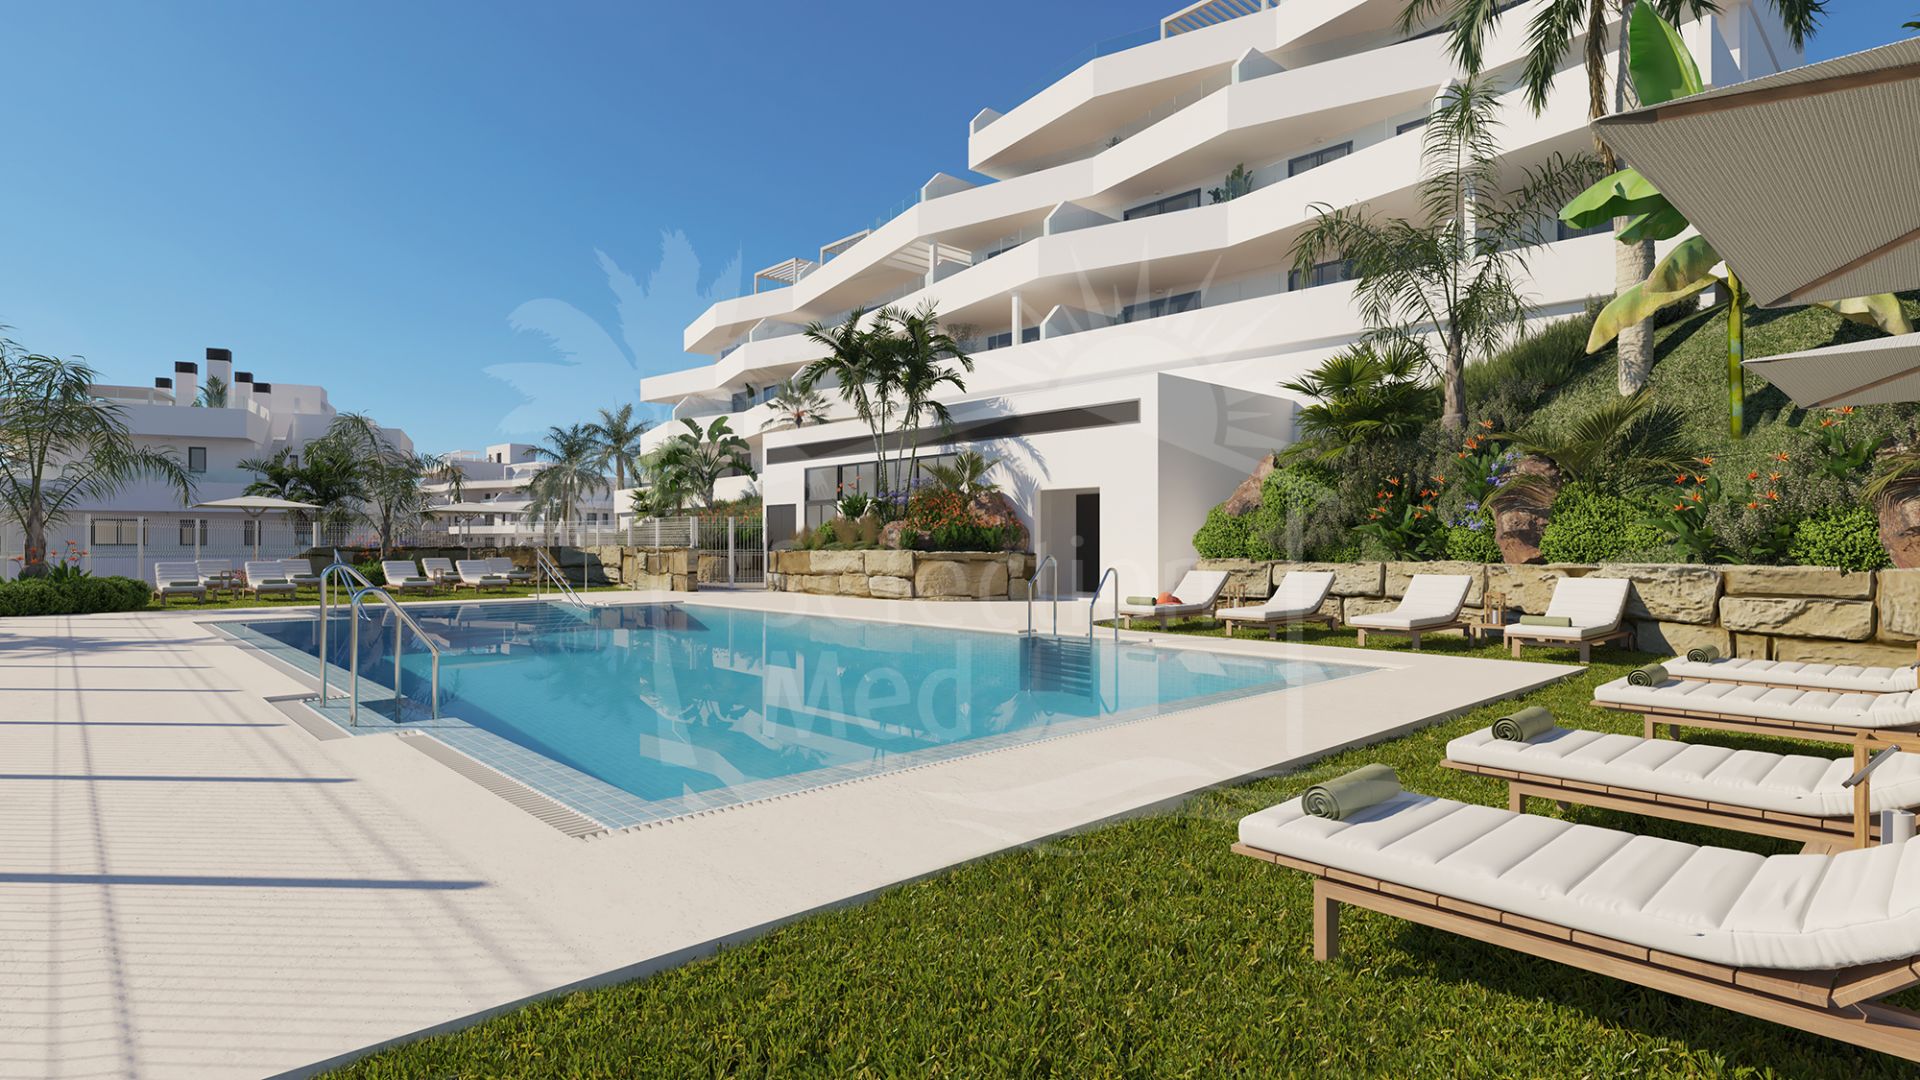 Brand New Off-Plan 3 Bedroom Duplex Penthouse Apartment Close to Estepona with Sea Views.